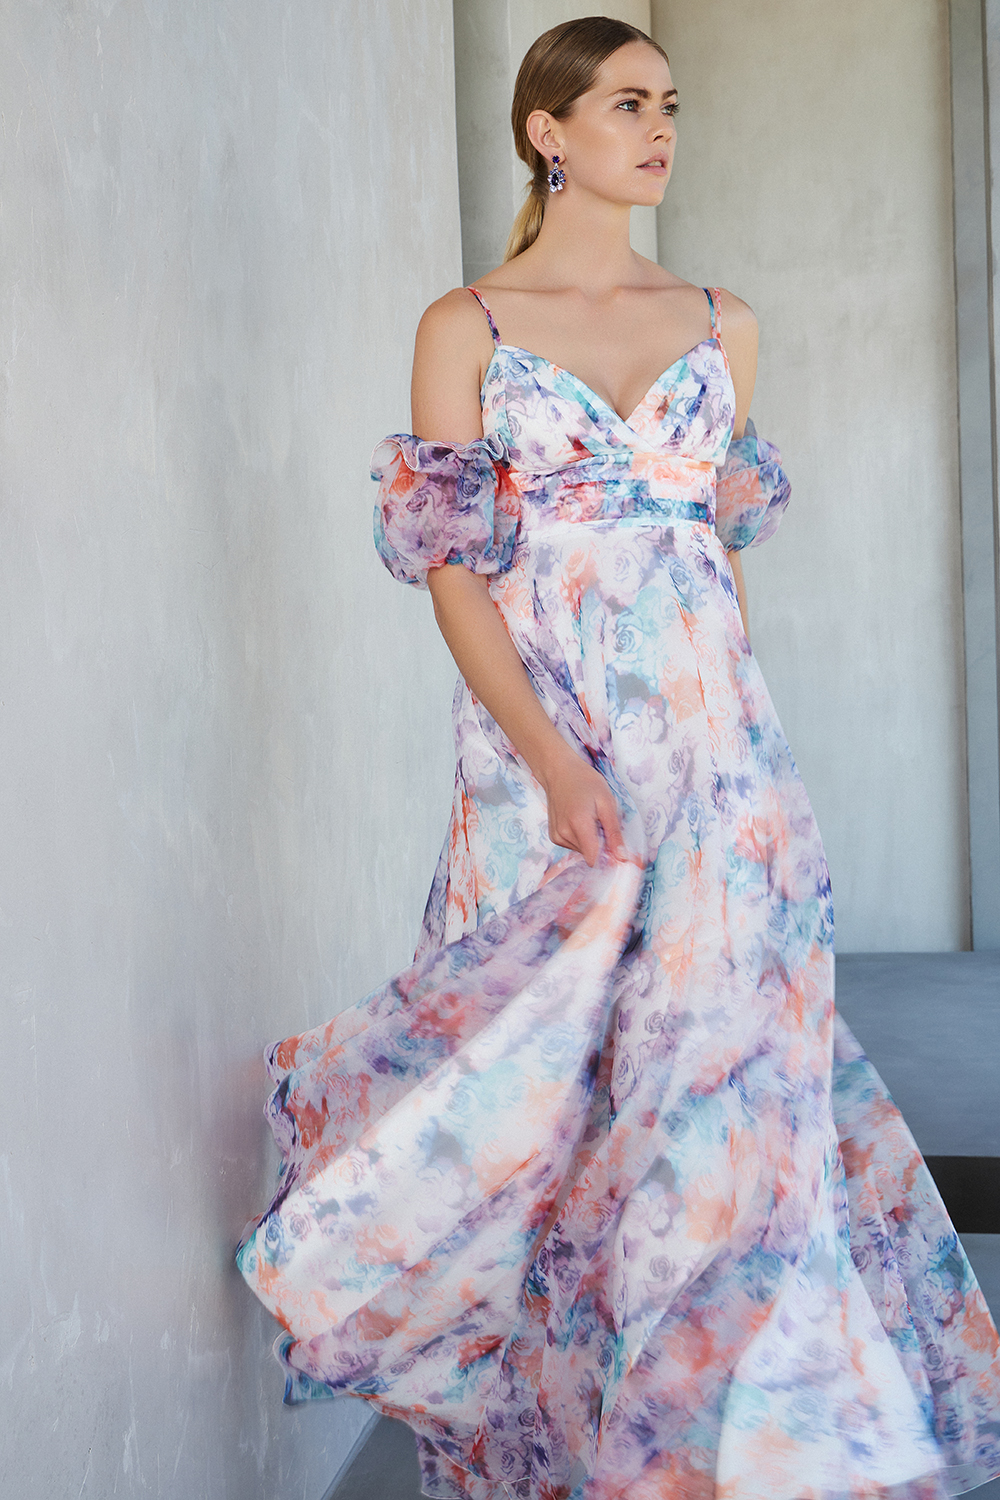 Long cocktail printed dress with organza fabric and sleeves